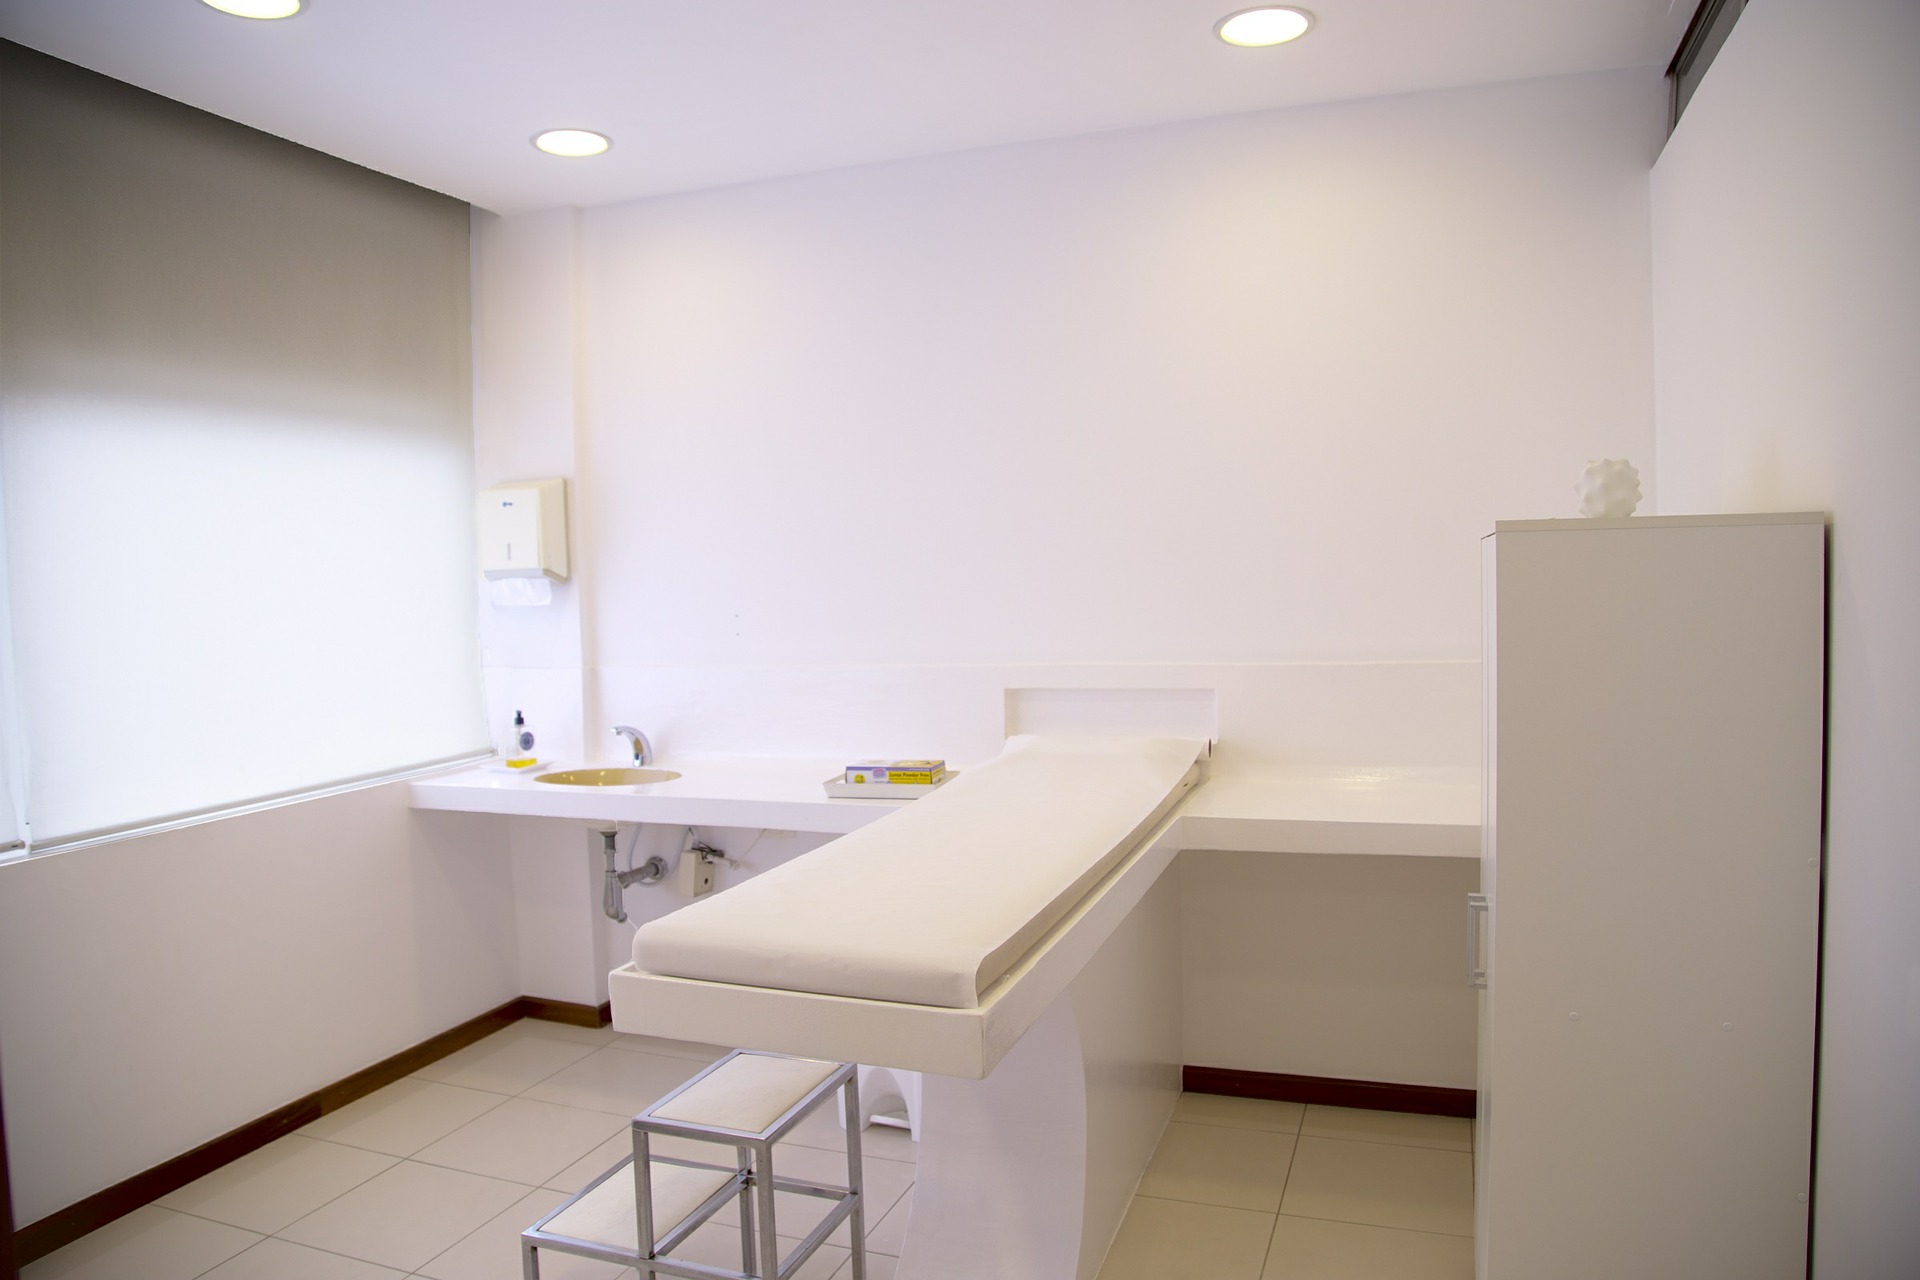 Minimalist medical treatment room with all white walls